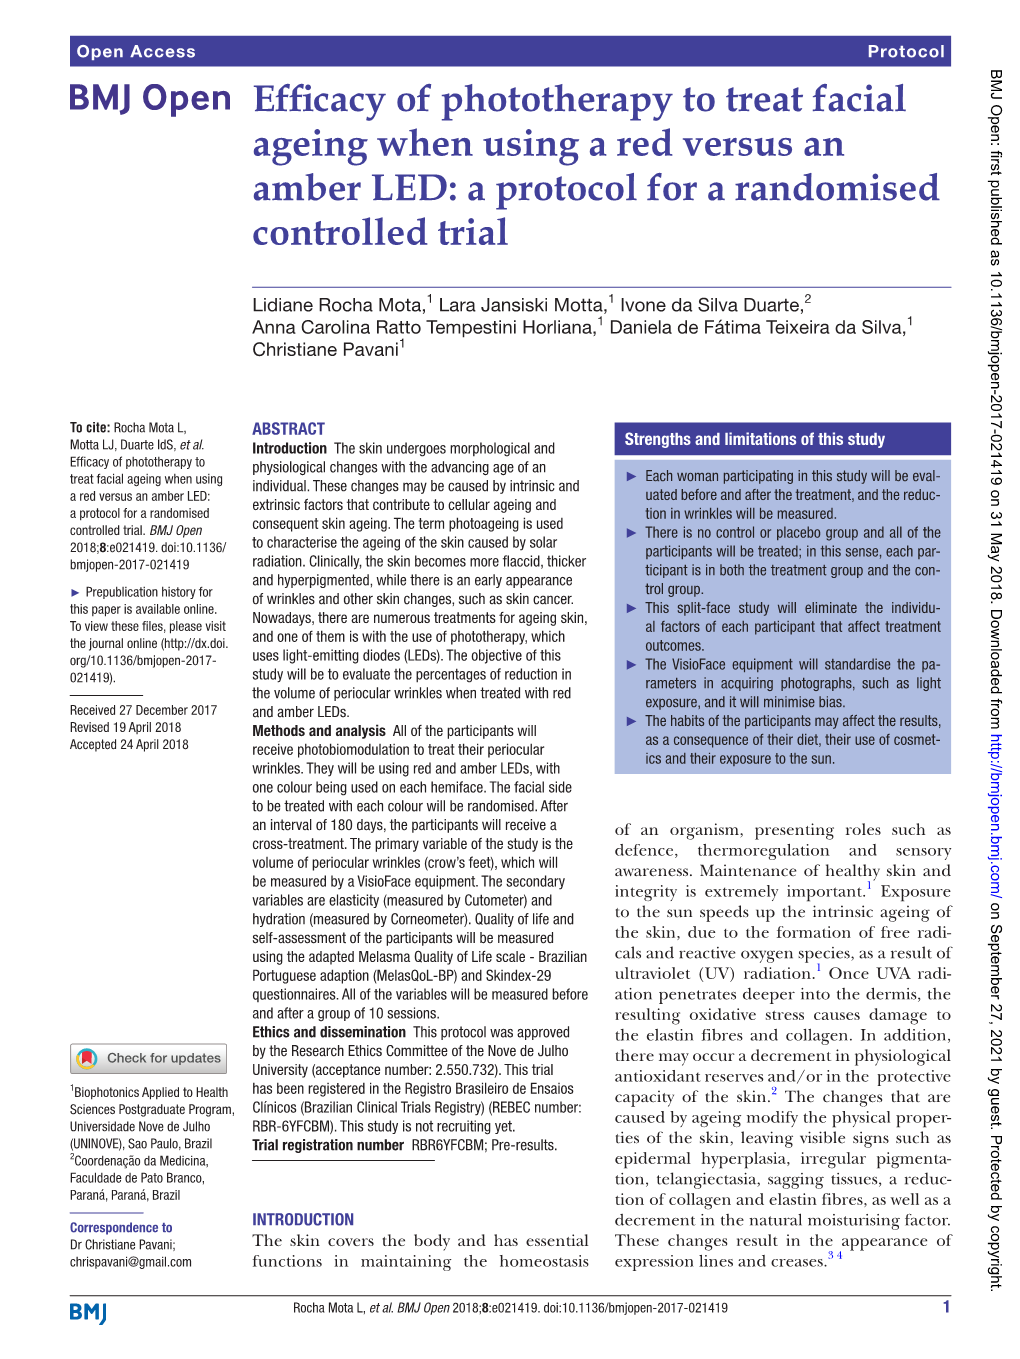 Efficacy of Phototherapy to Treat Facial Ageing When Using a Red Versus an Amber LED: a Protocol for a Randomised Controlled Trial